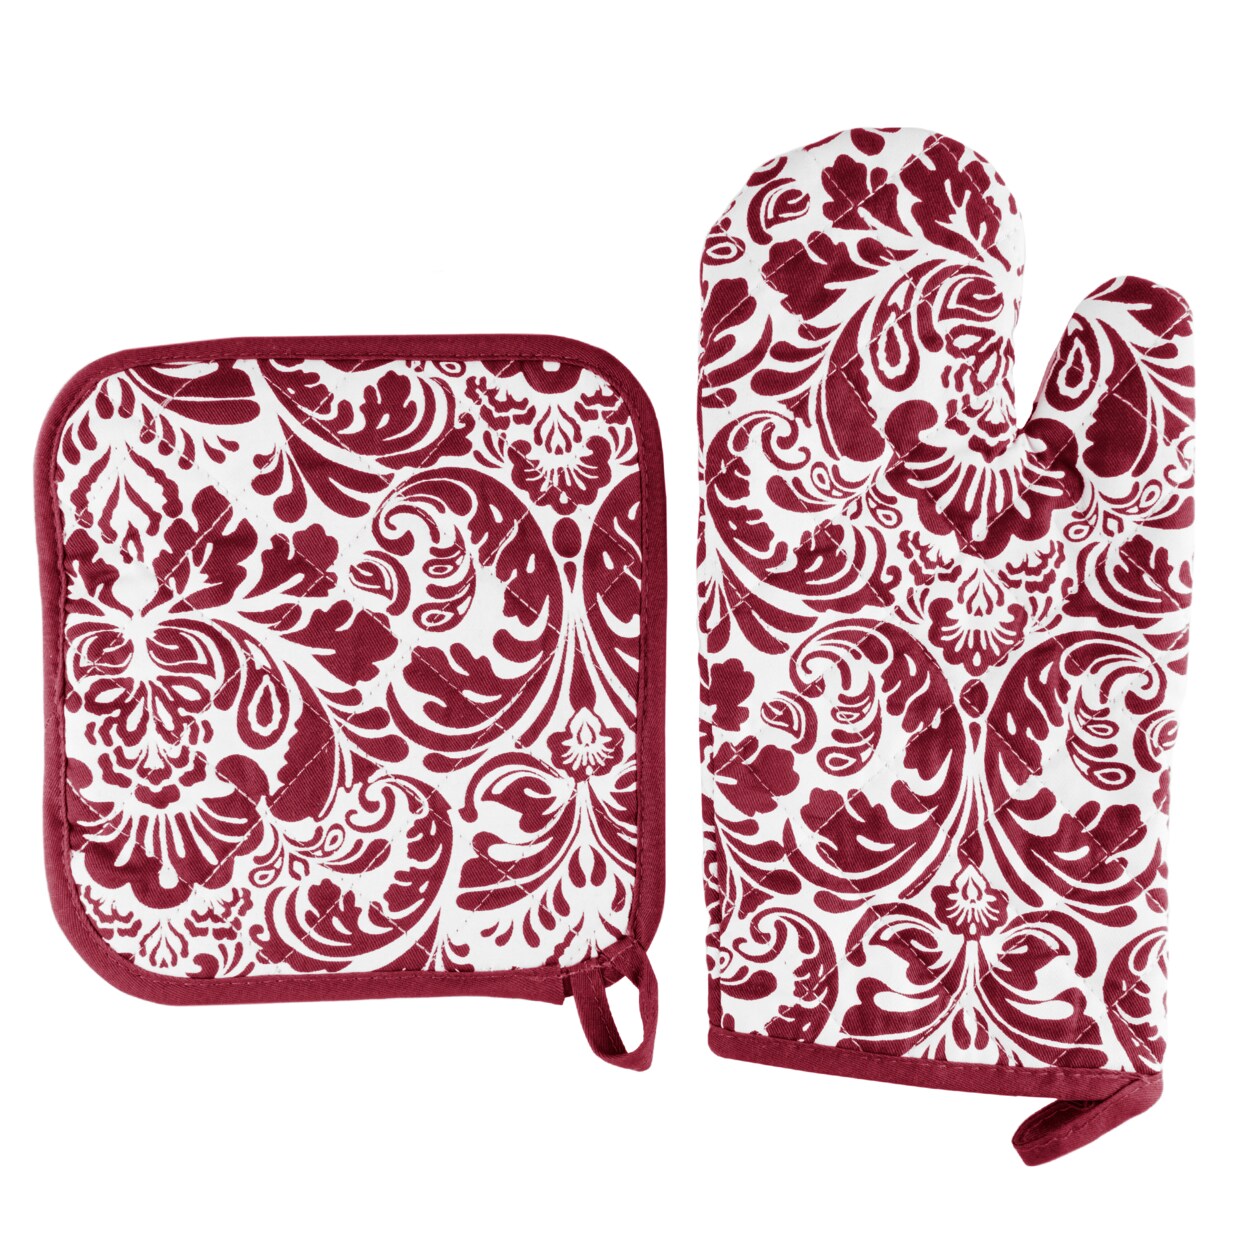 Lavish Home Oven Mitt and Pot Hold Oversized Flame Heat Protection Big Kitchen Safety Burgundy